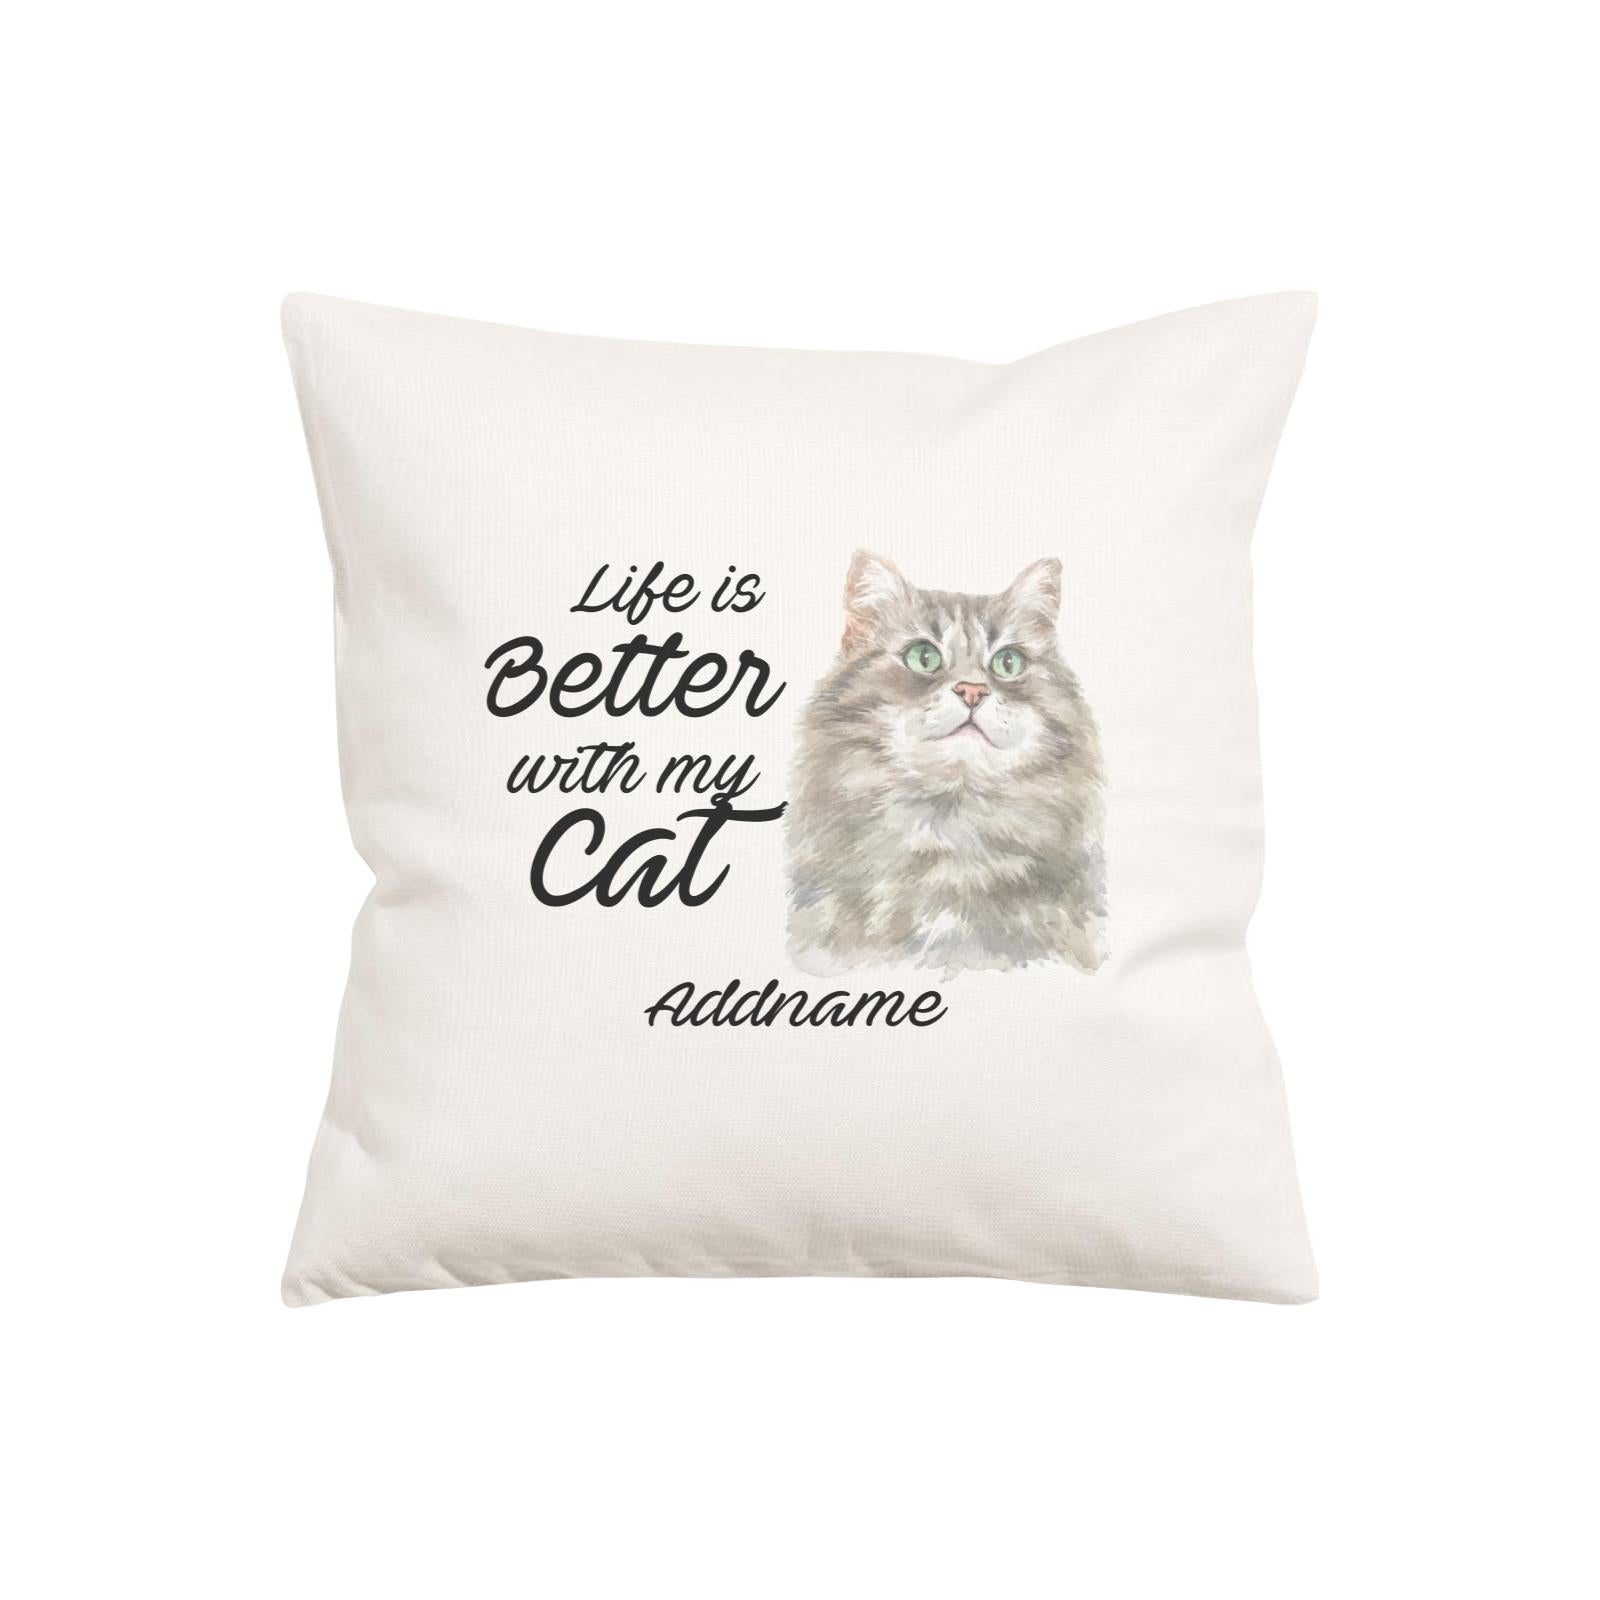 Watercolor Life is Better With My Cat Siberian Cat Grey Addname Pillow Cushion